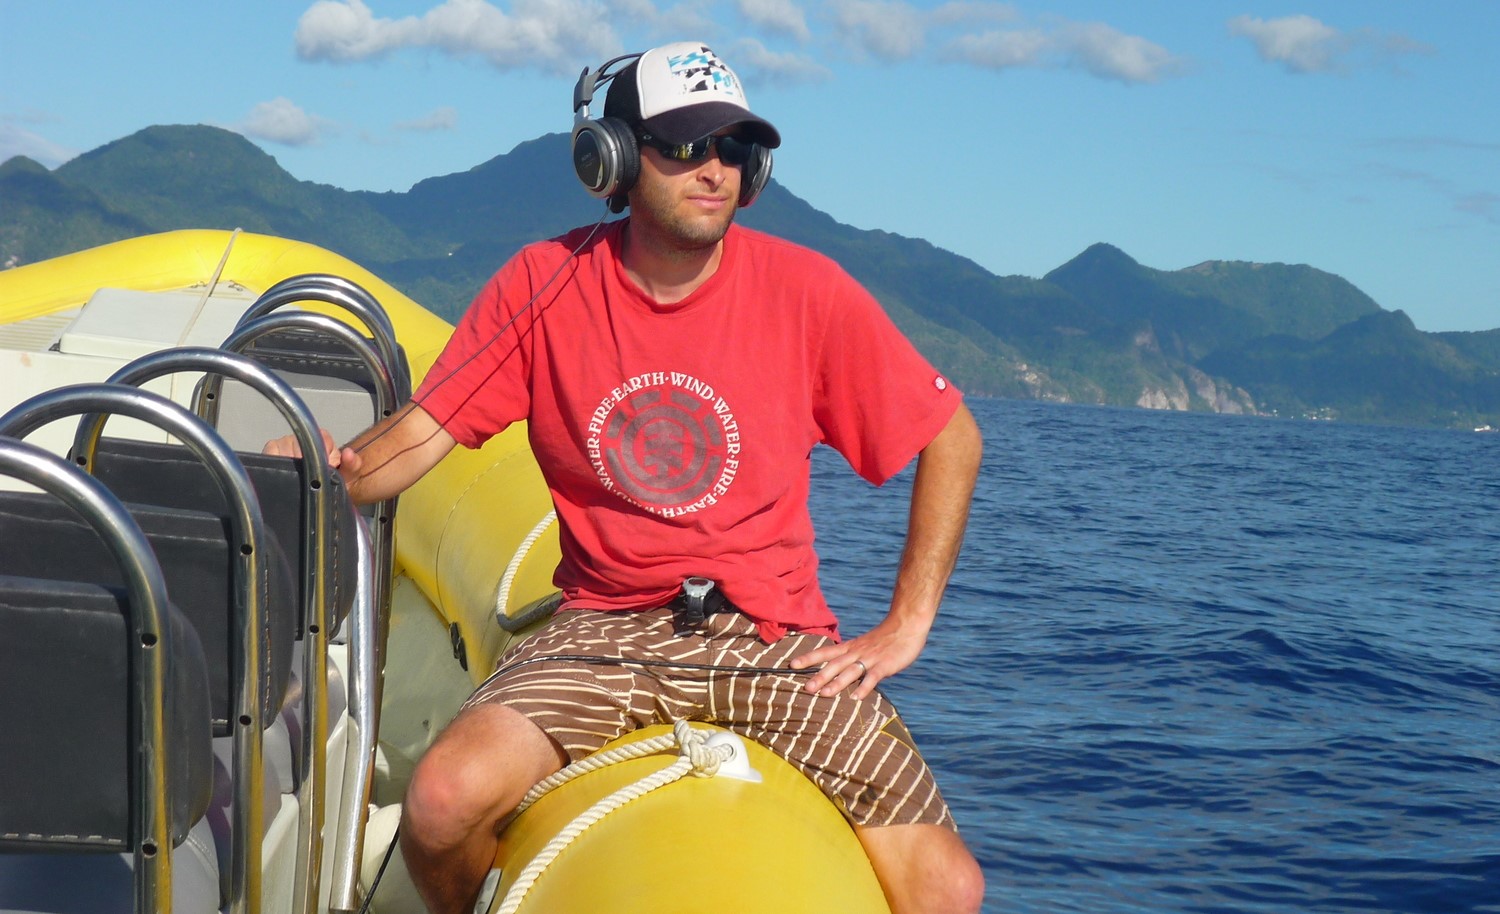 A man in a red shirt sits on a yellow boat with headphones on listening to whale communication